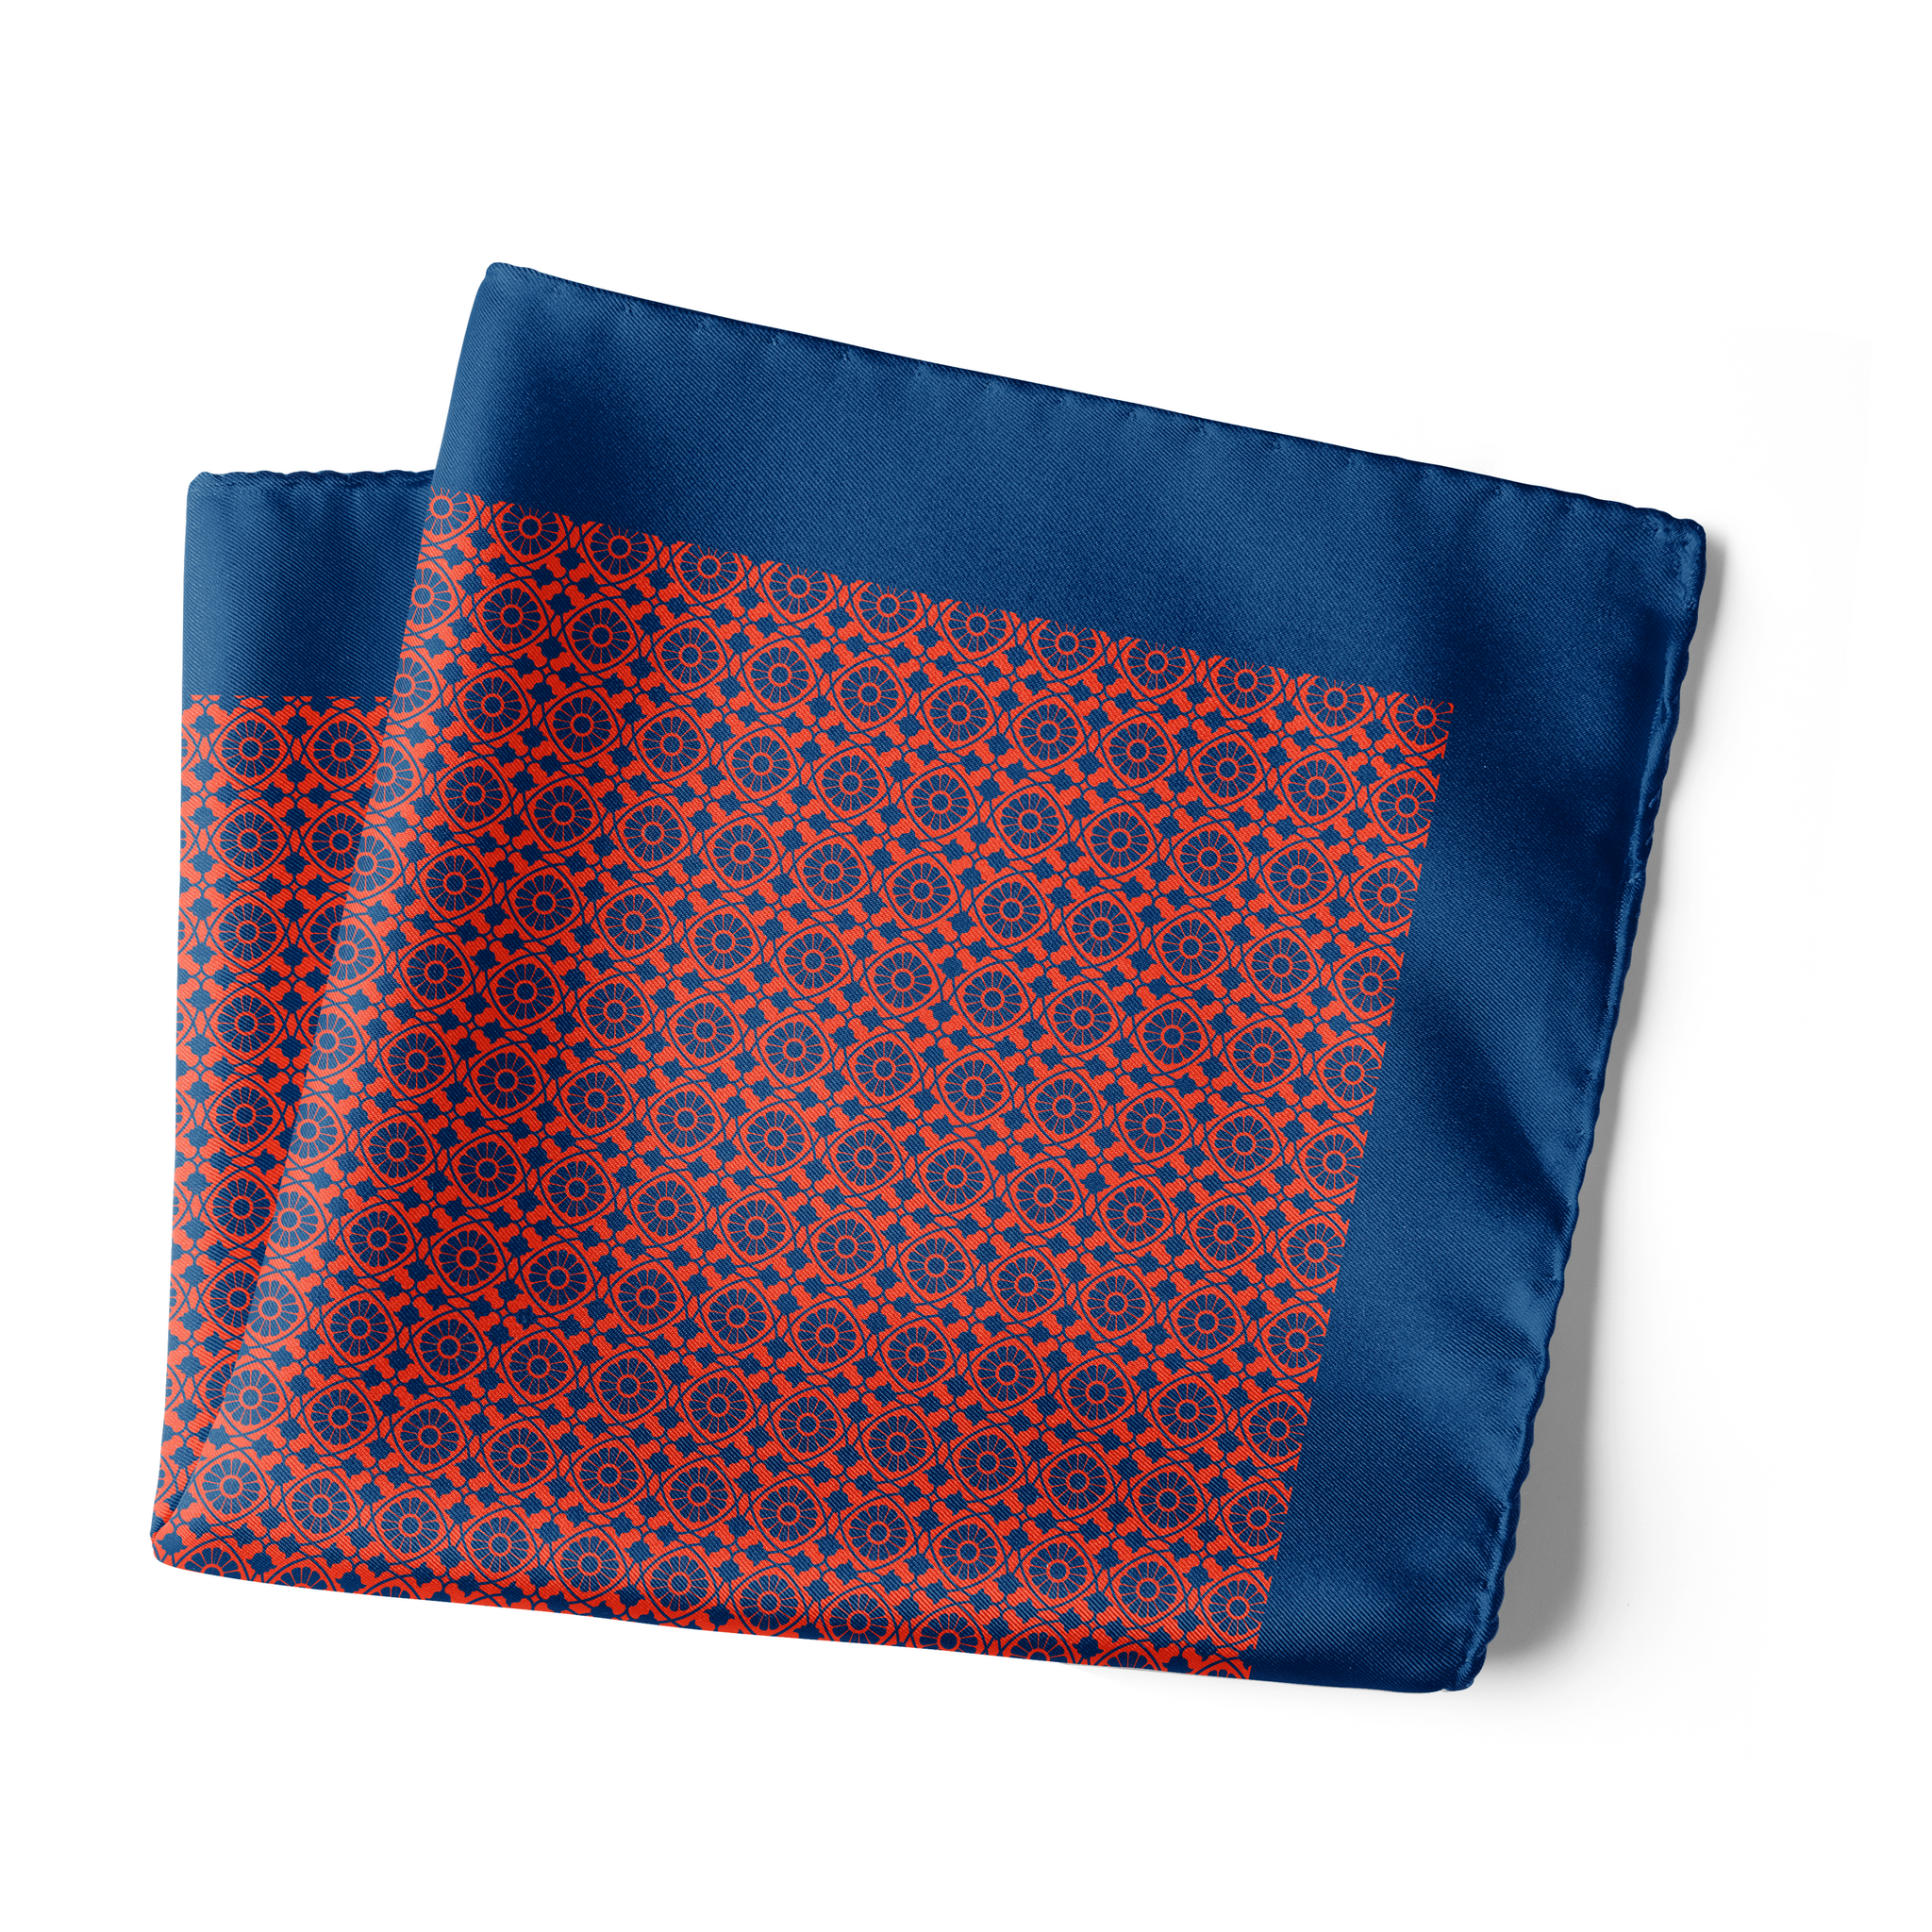 Chokore Red Satin Silk pocket square from the Plaids Line